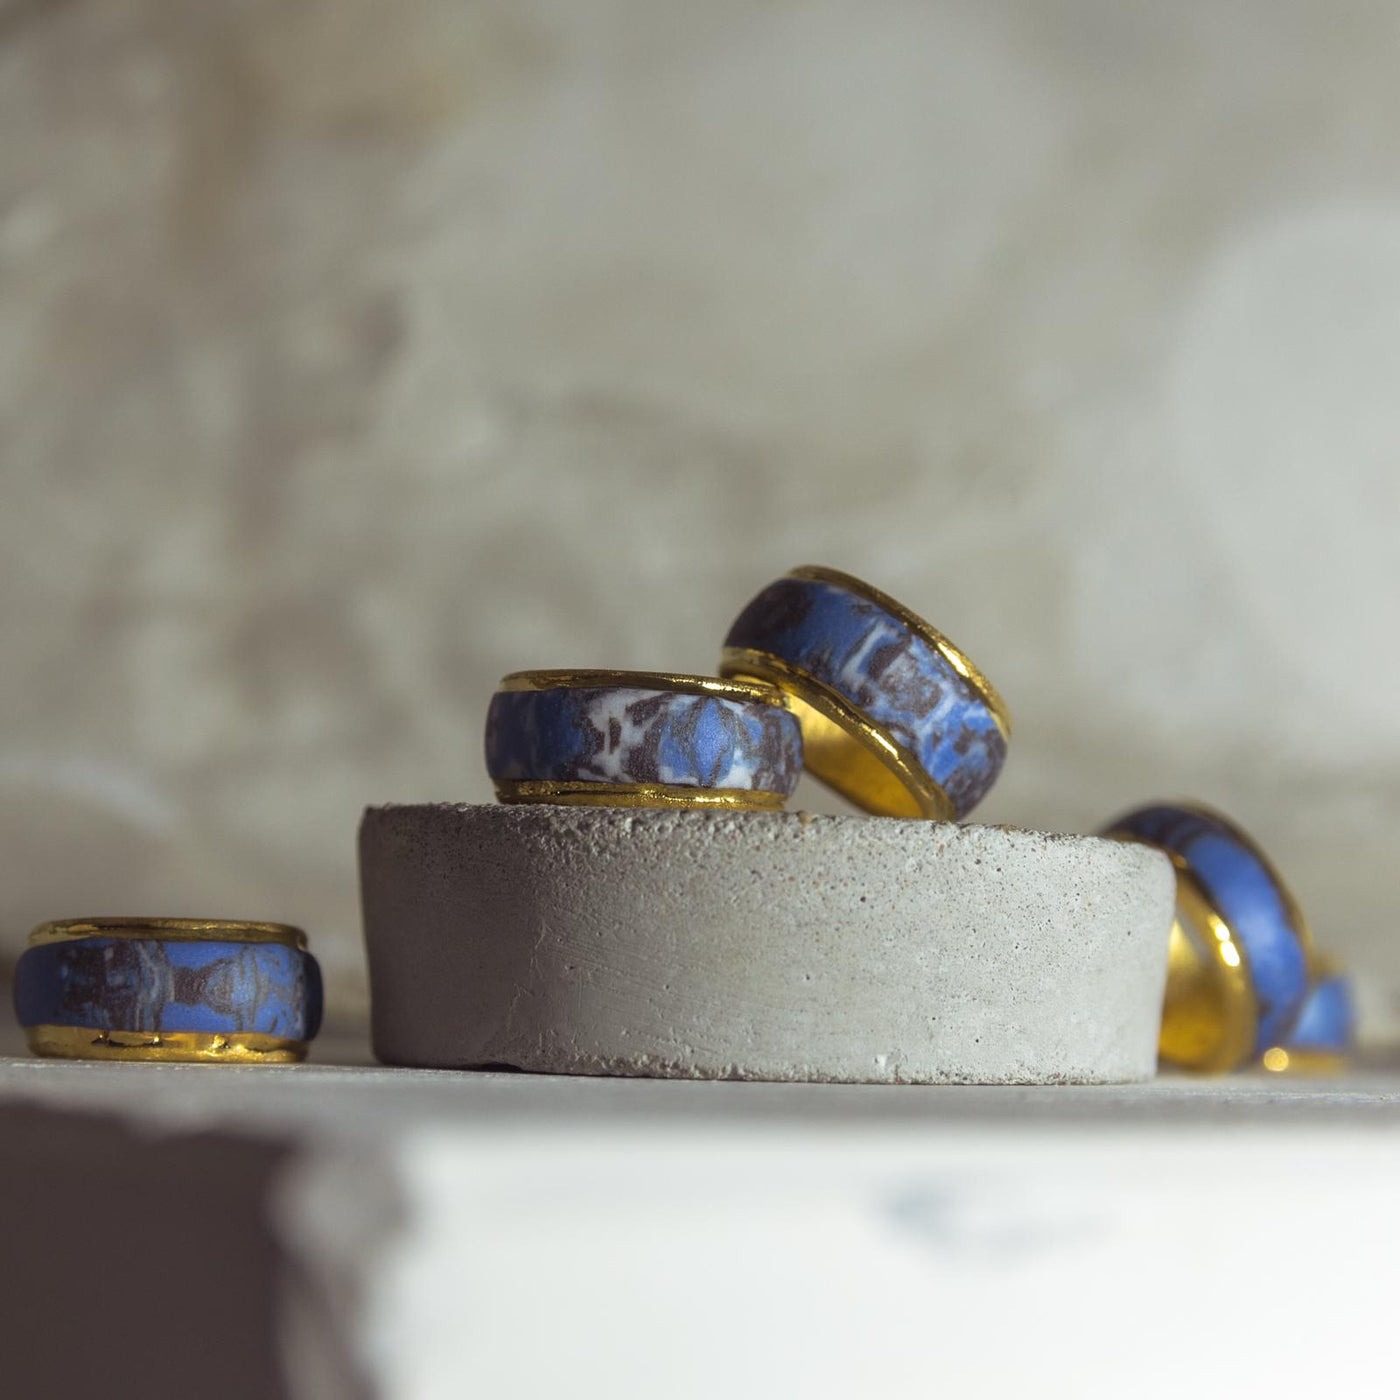 "Pemberley" Porcelain Ring With Gold